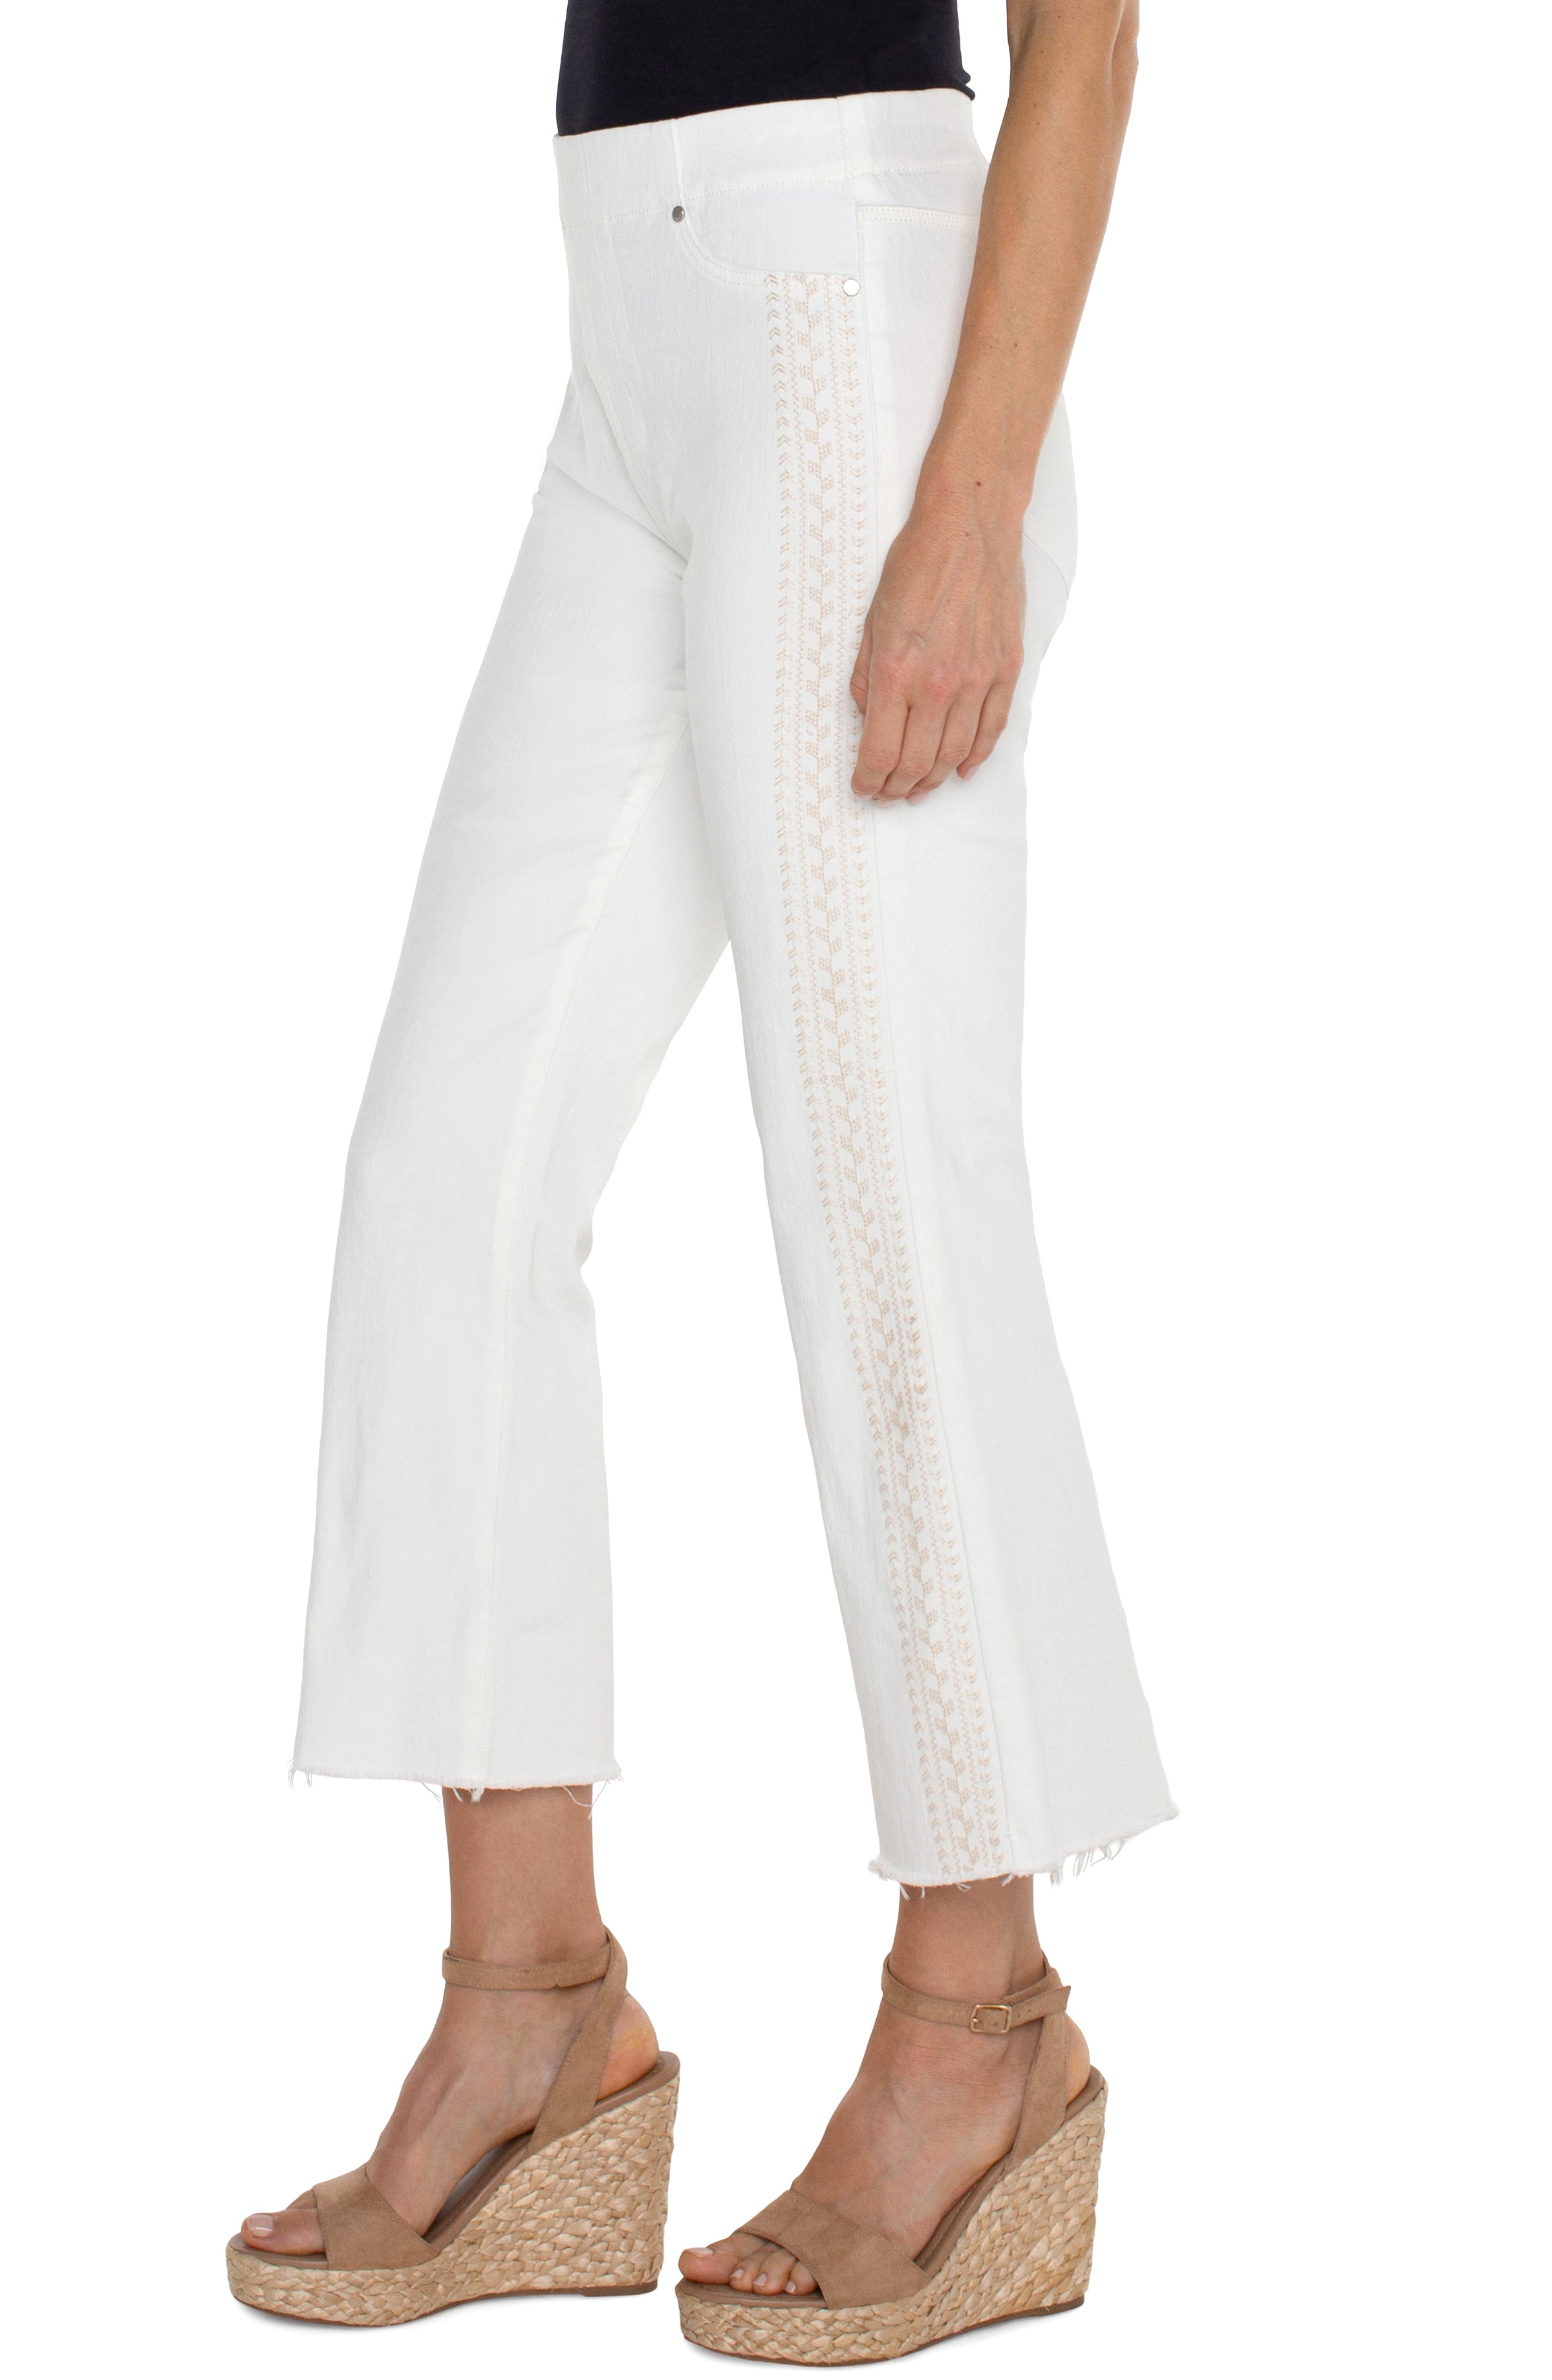 LVP Chloe Crop Flare with Fray Hem - Bright White Side View